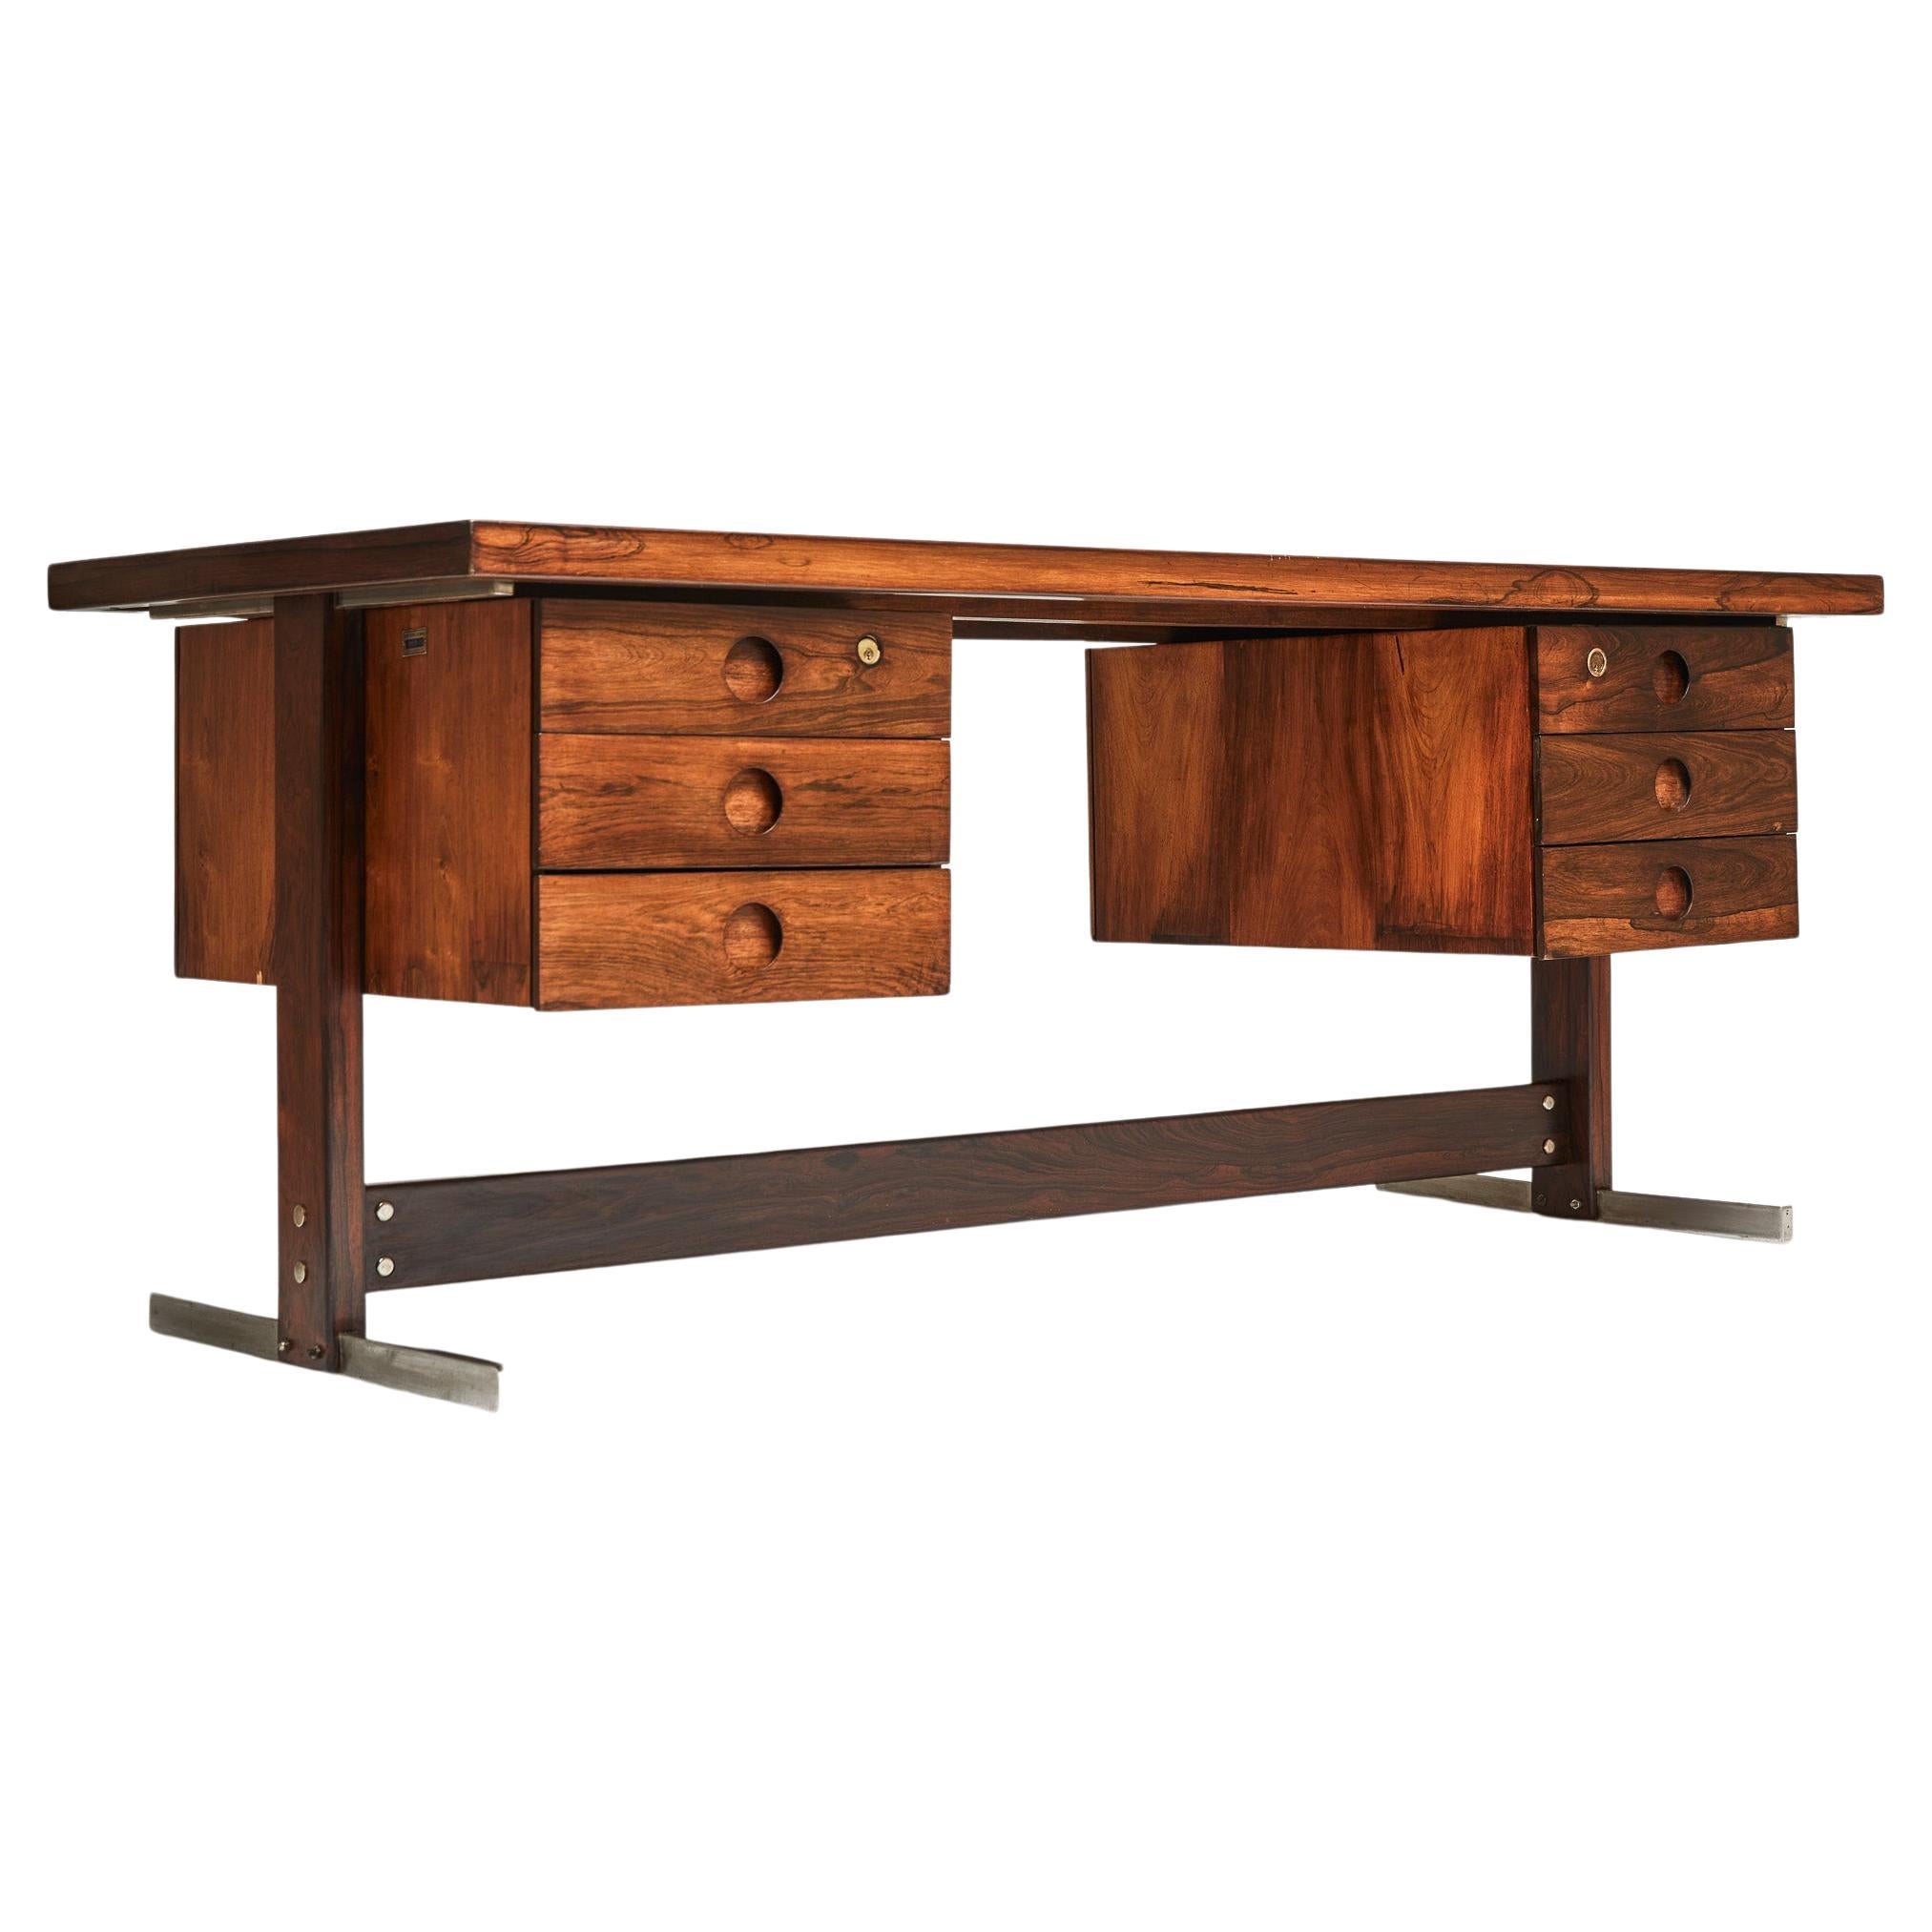 Available now, this Mid-Century Modern desk in Hardwood & Chrome by Sergio Rodrigues, is stunning!

This Brazilian Modern beauty is made of Brazilian rosewood, as known as Jacaranda and has six floating drawers and chrome-plated steel finishes.